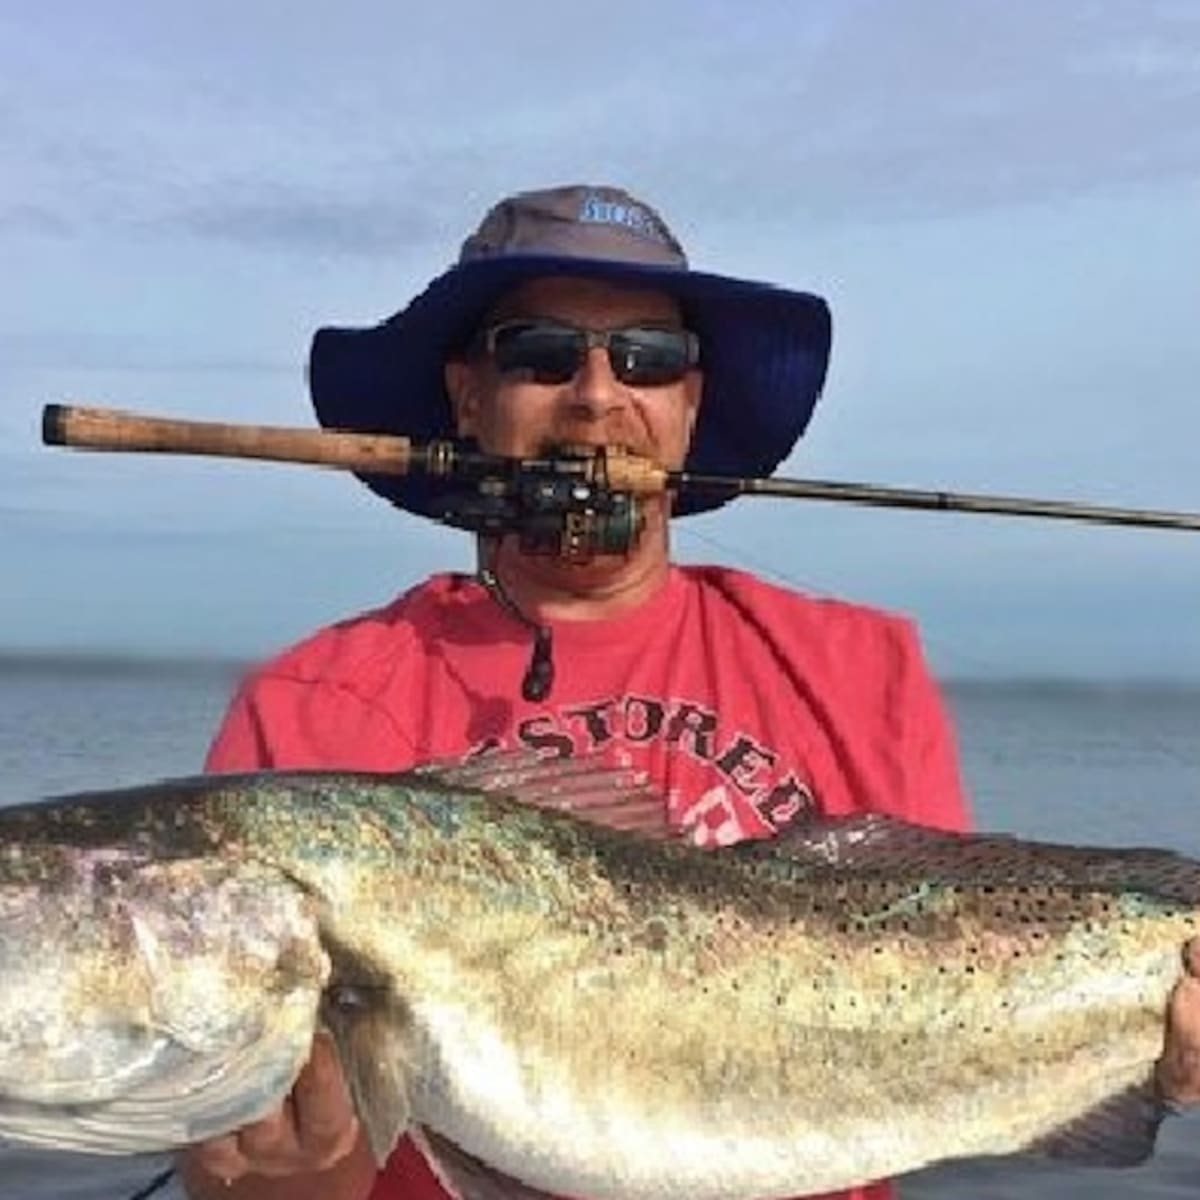 Massive seatrout likely to break world record - Men's Journal